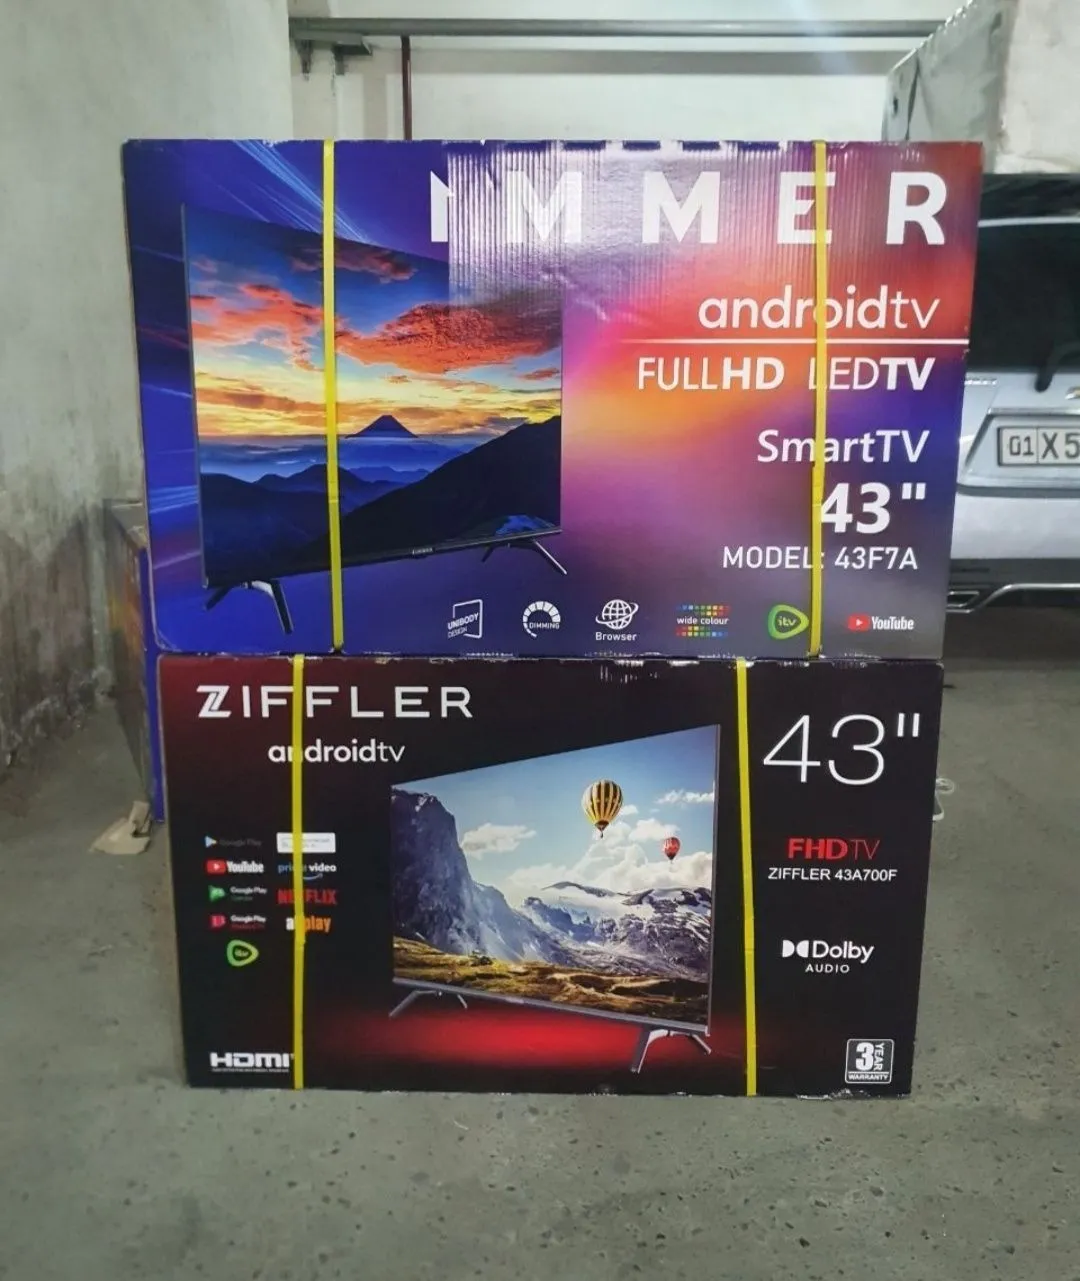 Телевизор Immer 43" 1080p Full HD Smart TV Wi-Fi Android#1